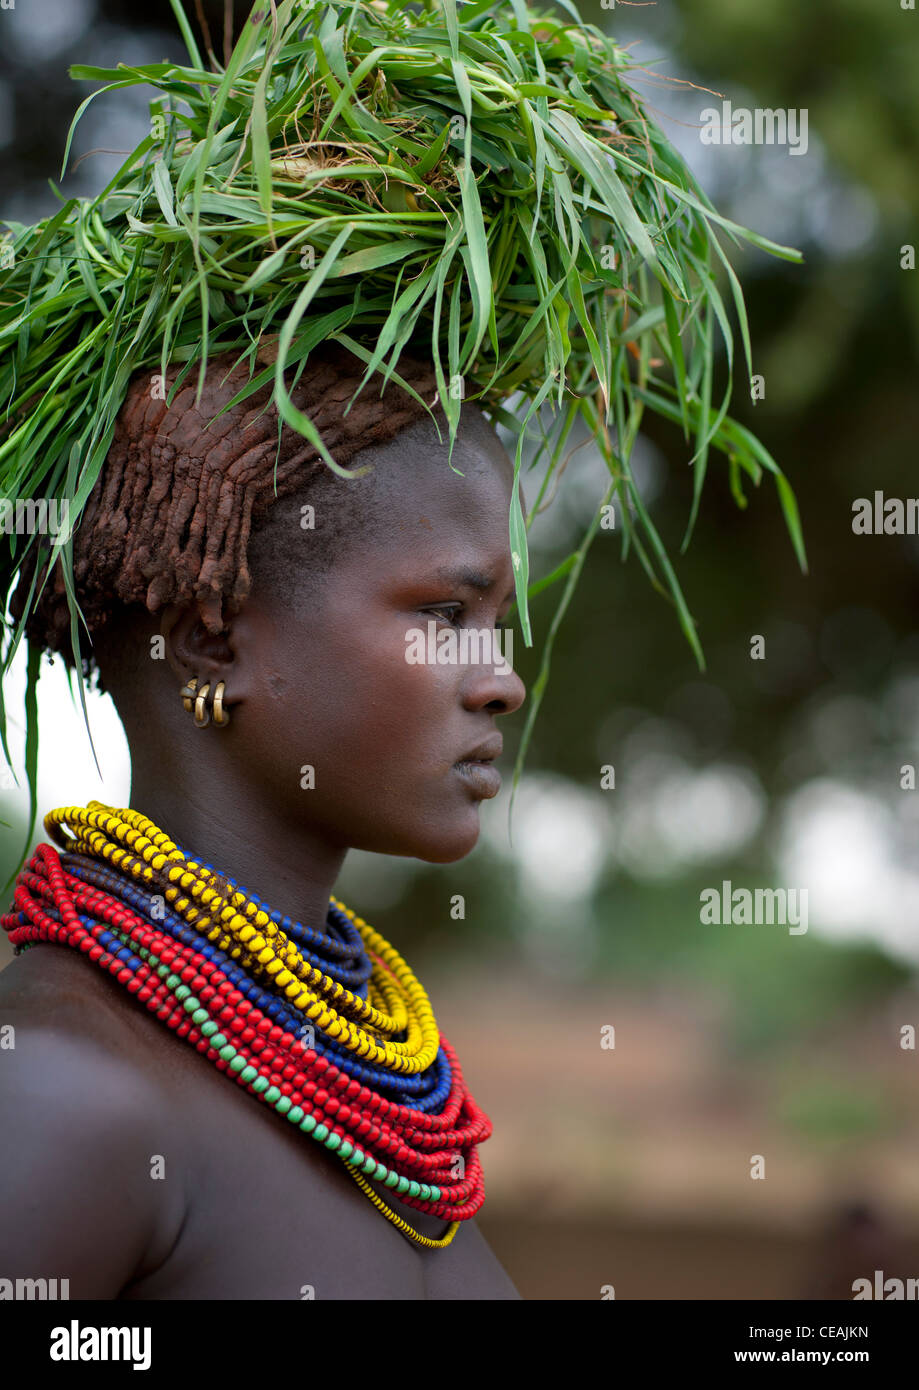 Dassanech Young Woman Carrying Load Of Green Grass On Head And Beaded Necklaces Omo Valley Ethiopia Stock Photo